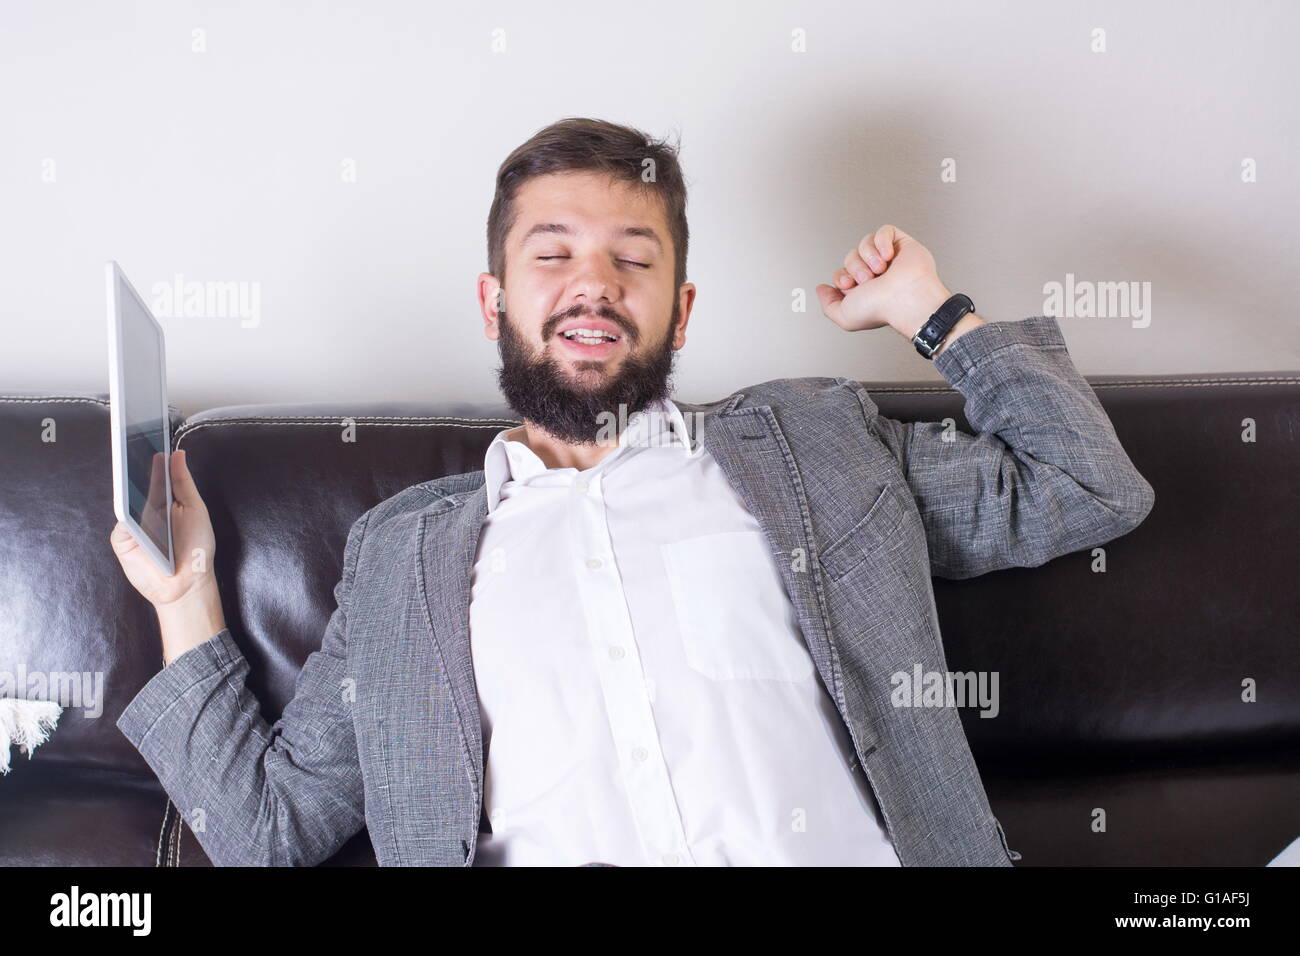 Sleepy businessman stretching with a tablet device Stock Photo